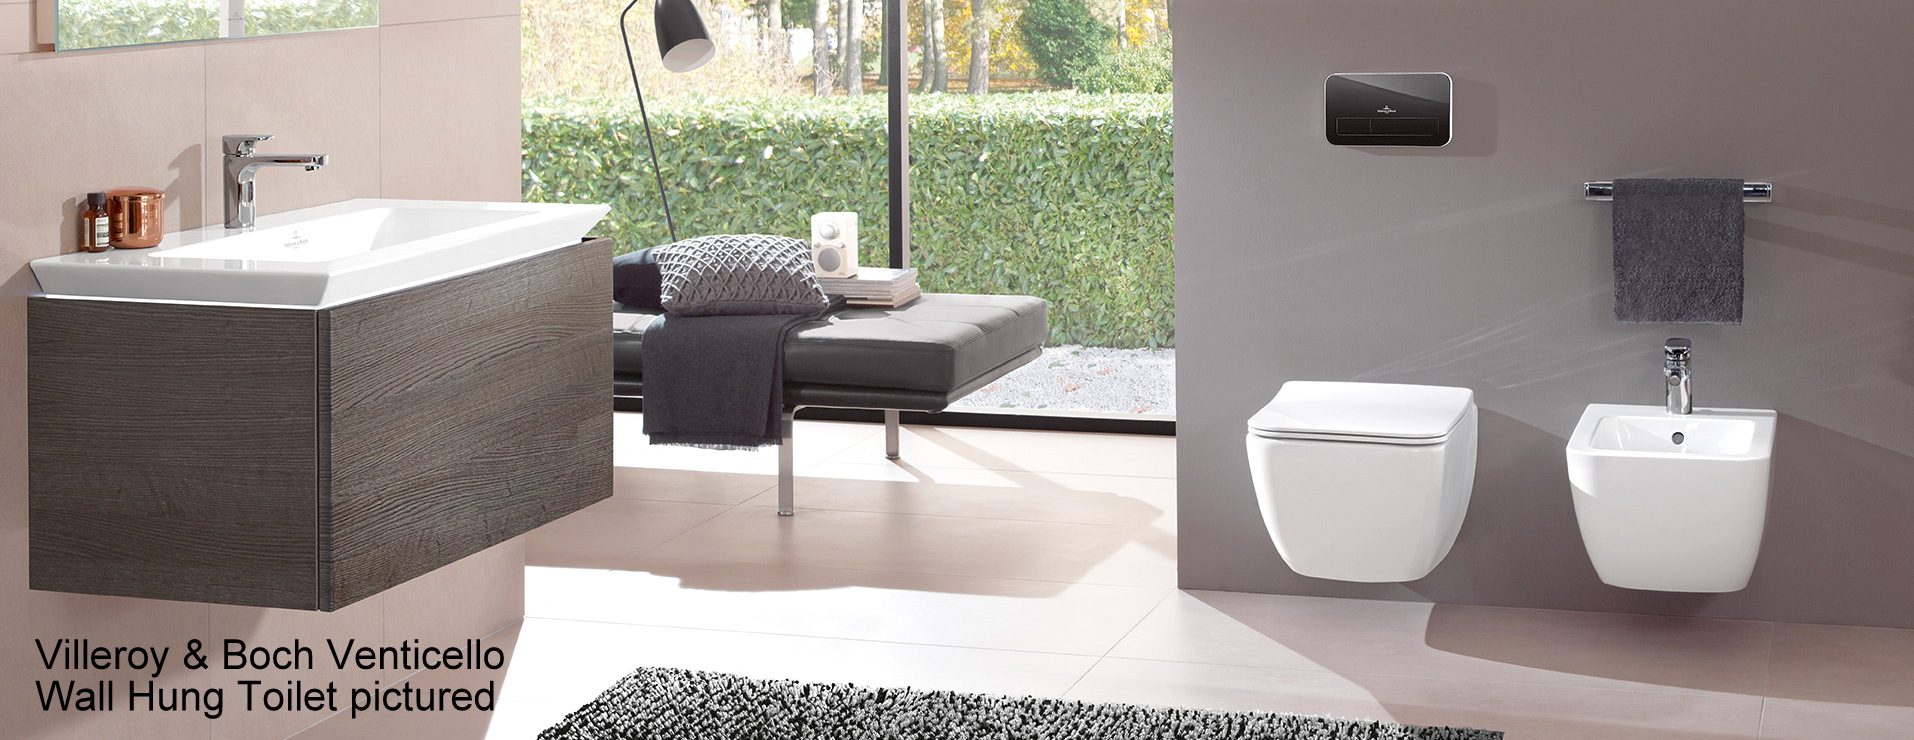 Villeroy and Boch wall hung toilets